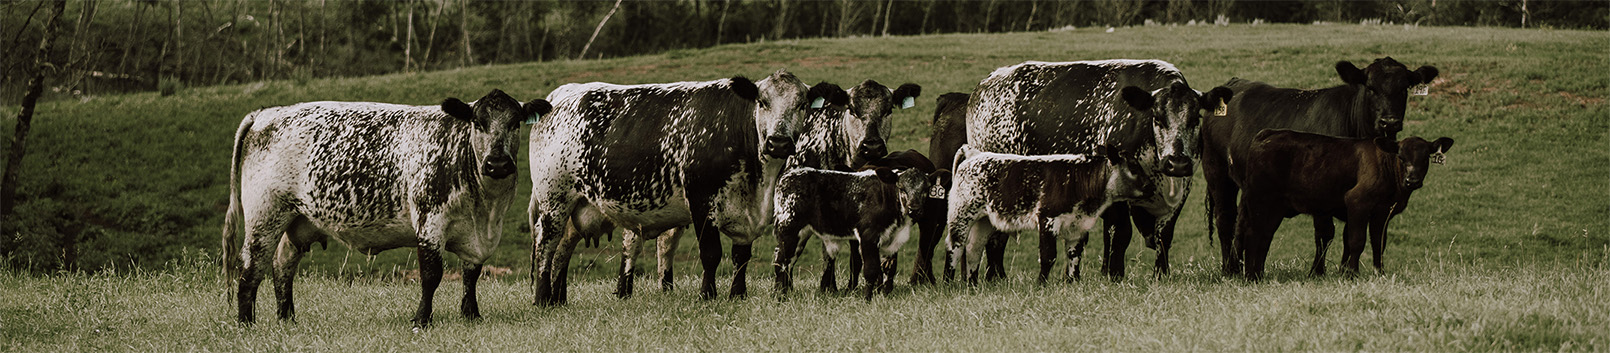 small group of speckle park cattle stand in field looking towards camera